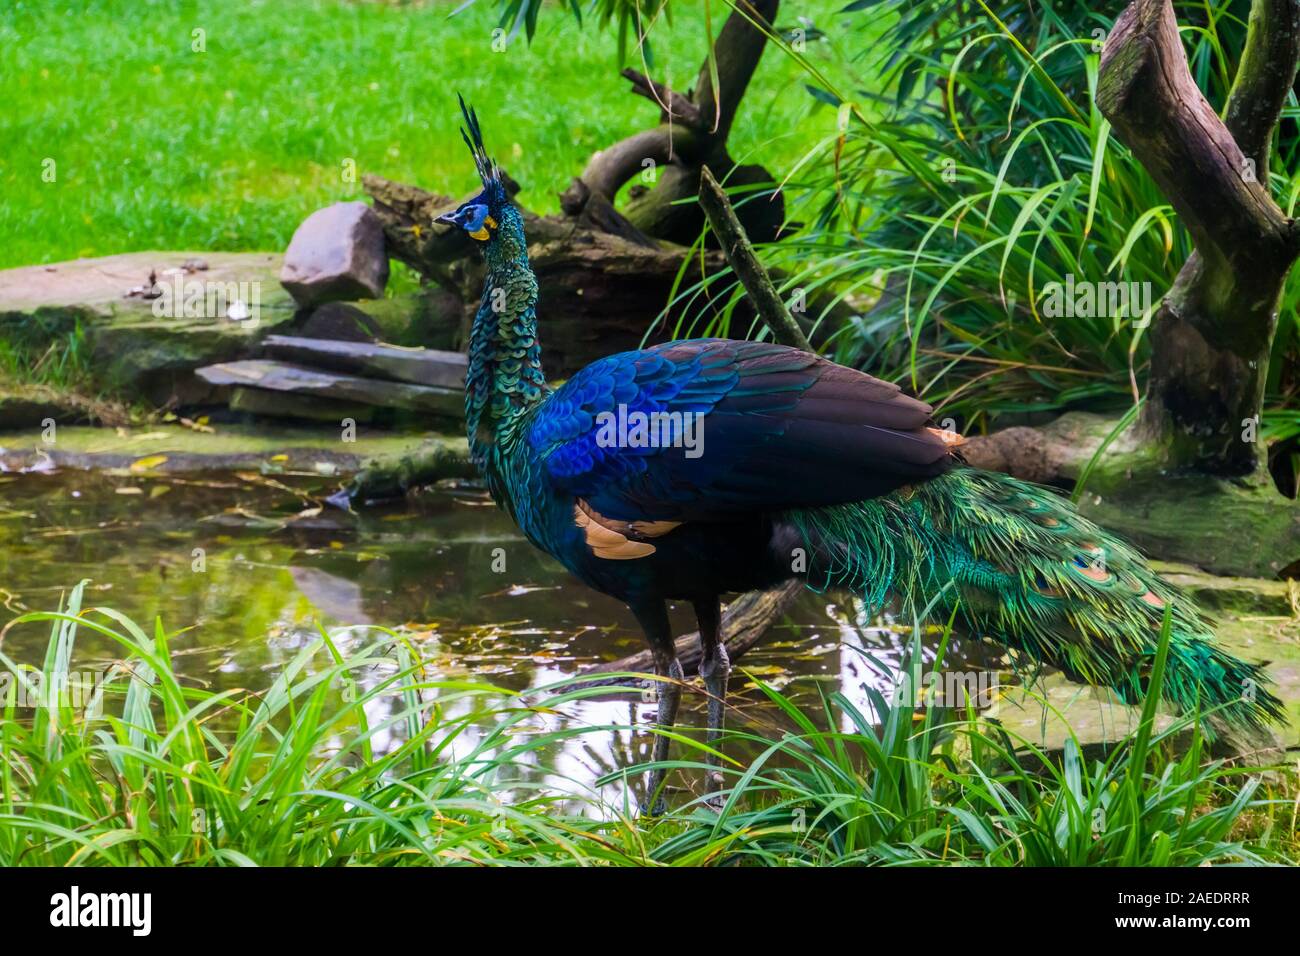 green java peacock standing at the water side, Beautiful colorful bird from Java in indonesia, tropical endangered animal specie Stock Photo